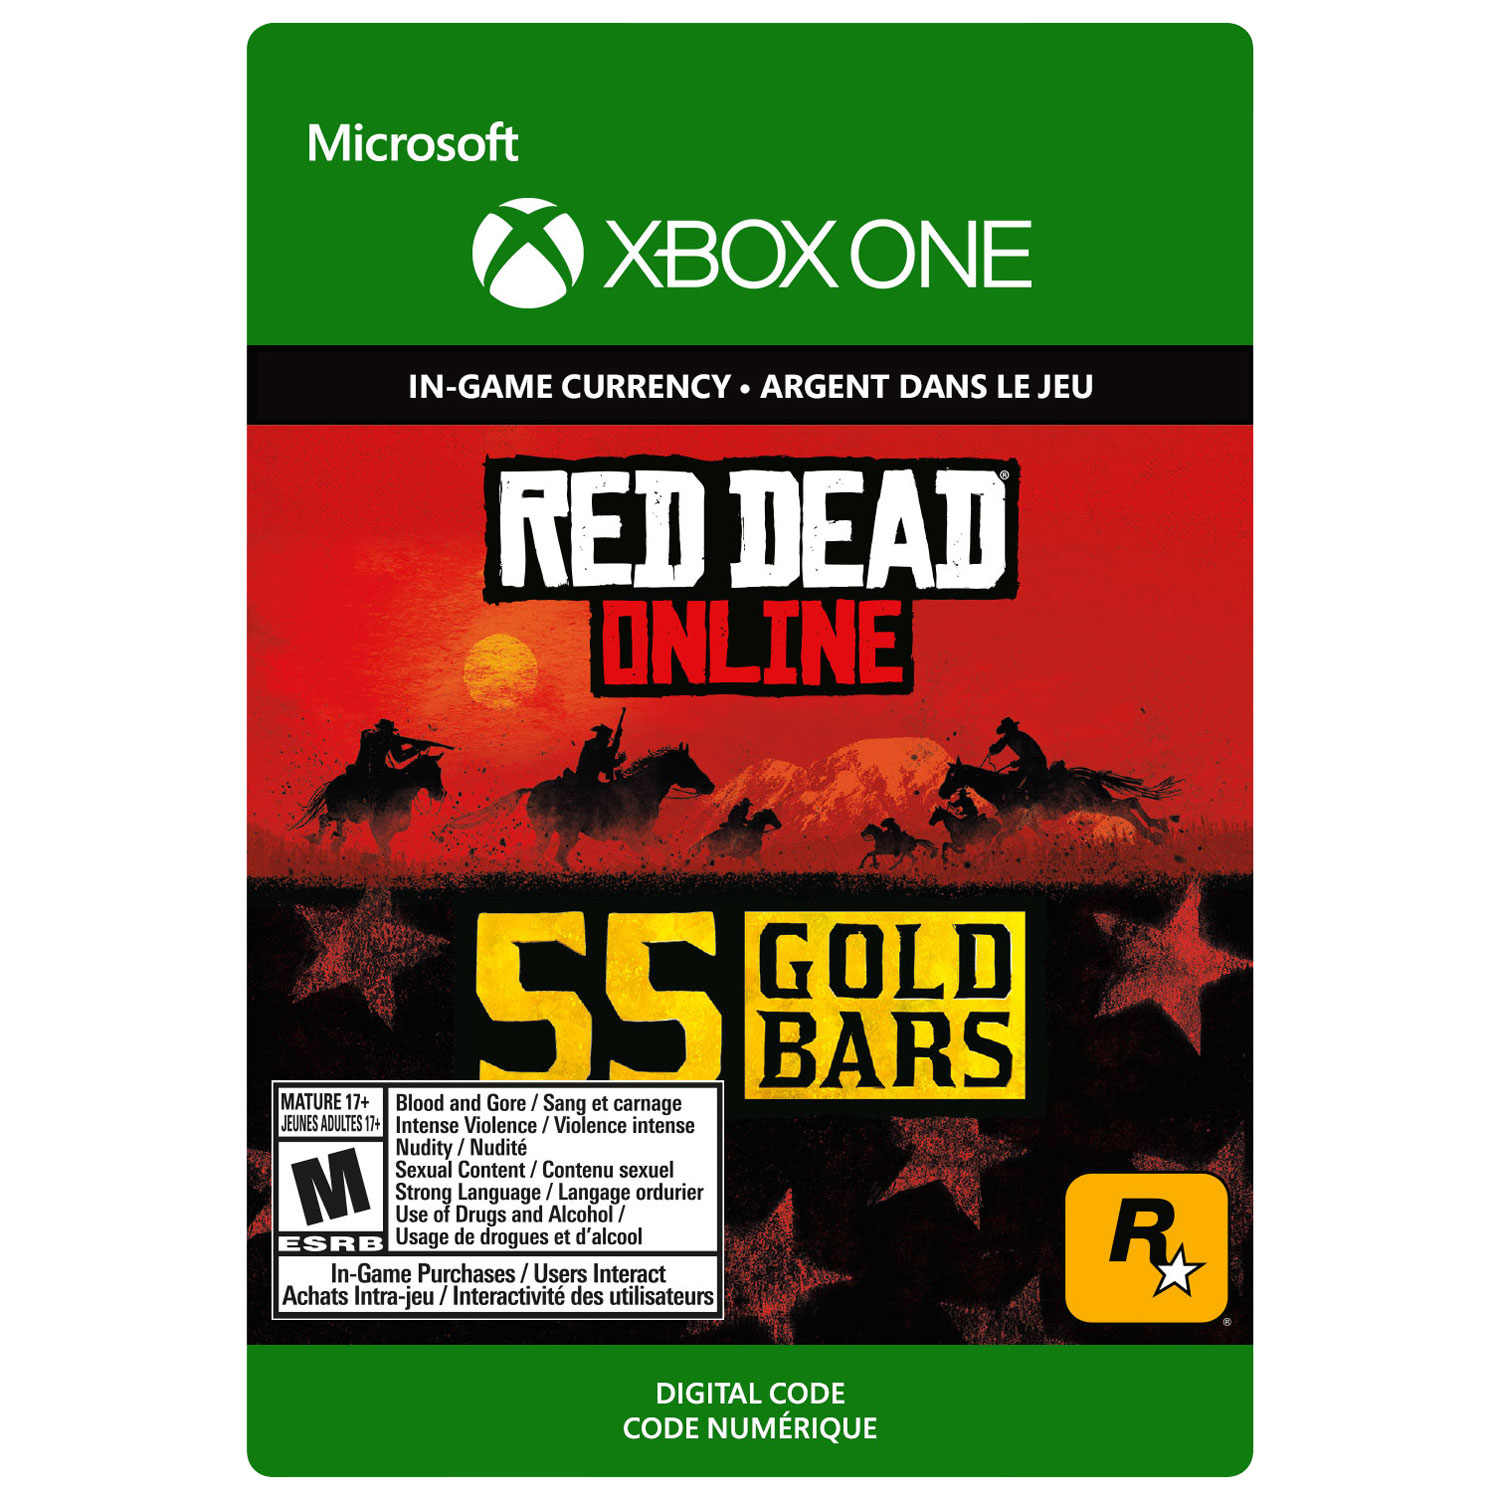 Red Dead Redemption 2: 55 Gold Bars (Xbox One) - Digital Download